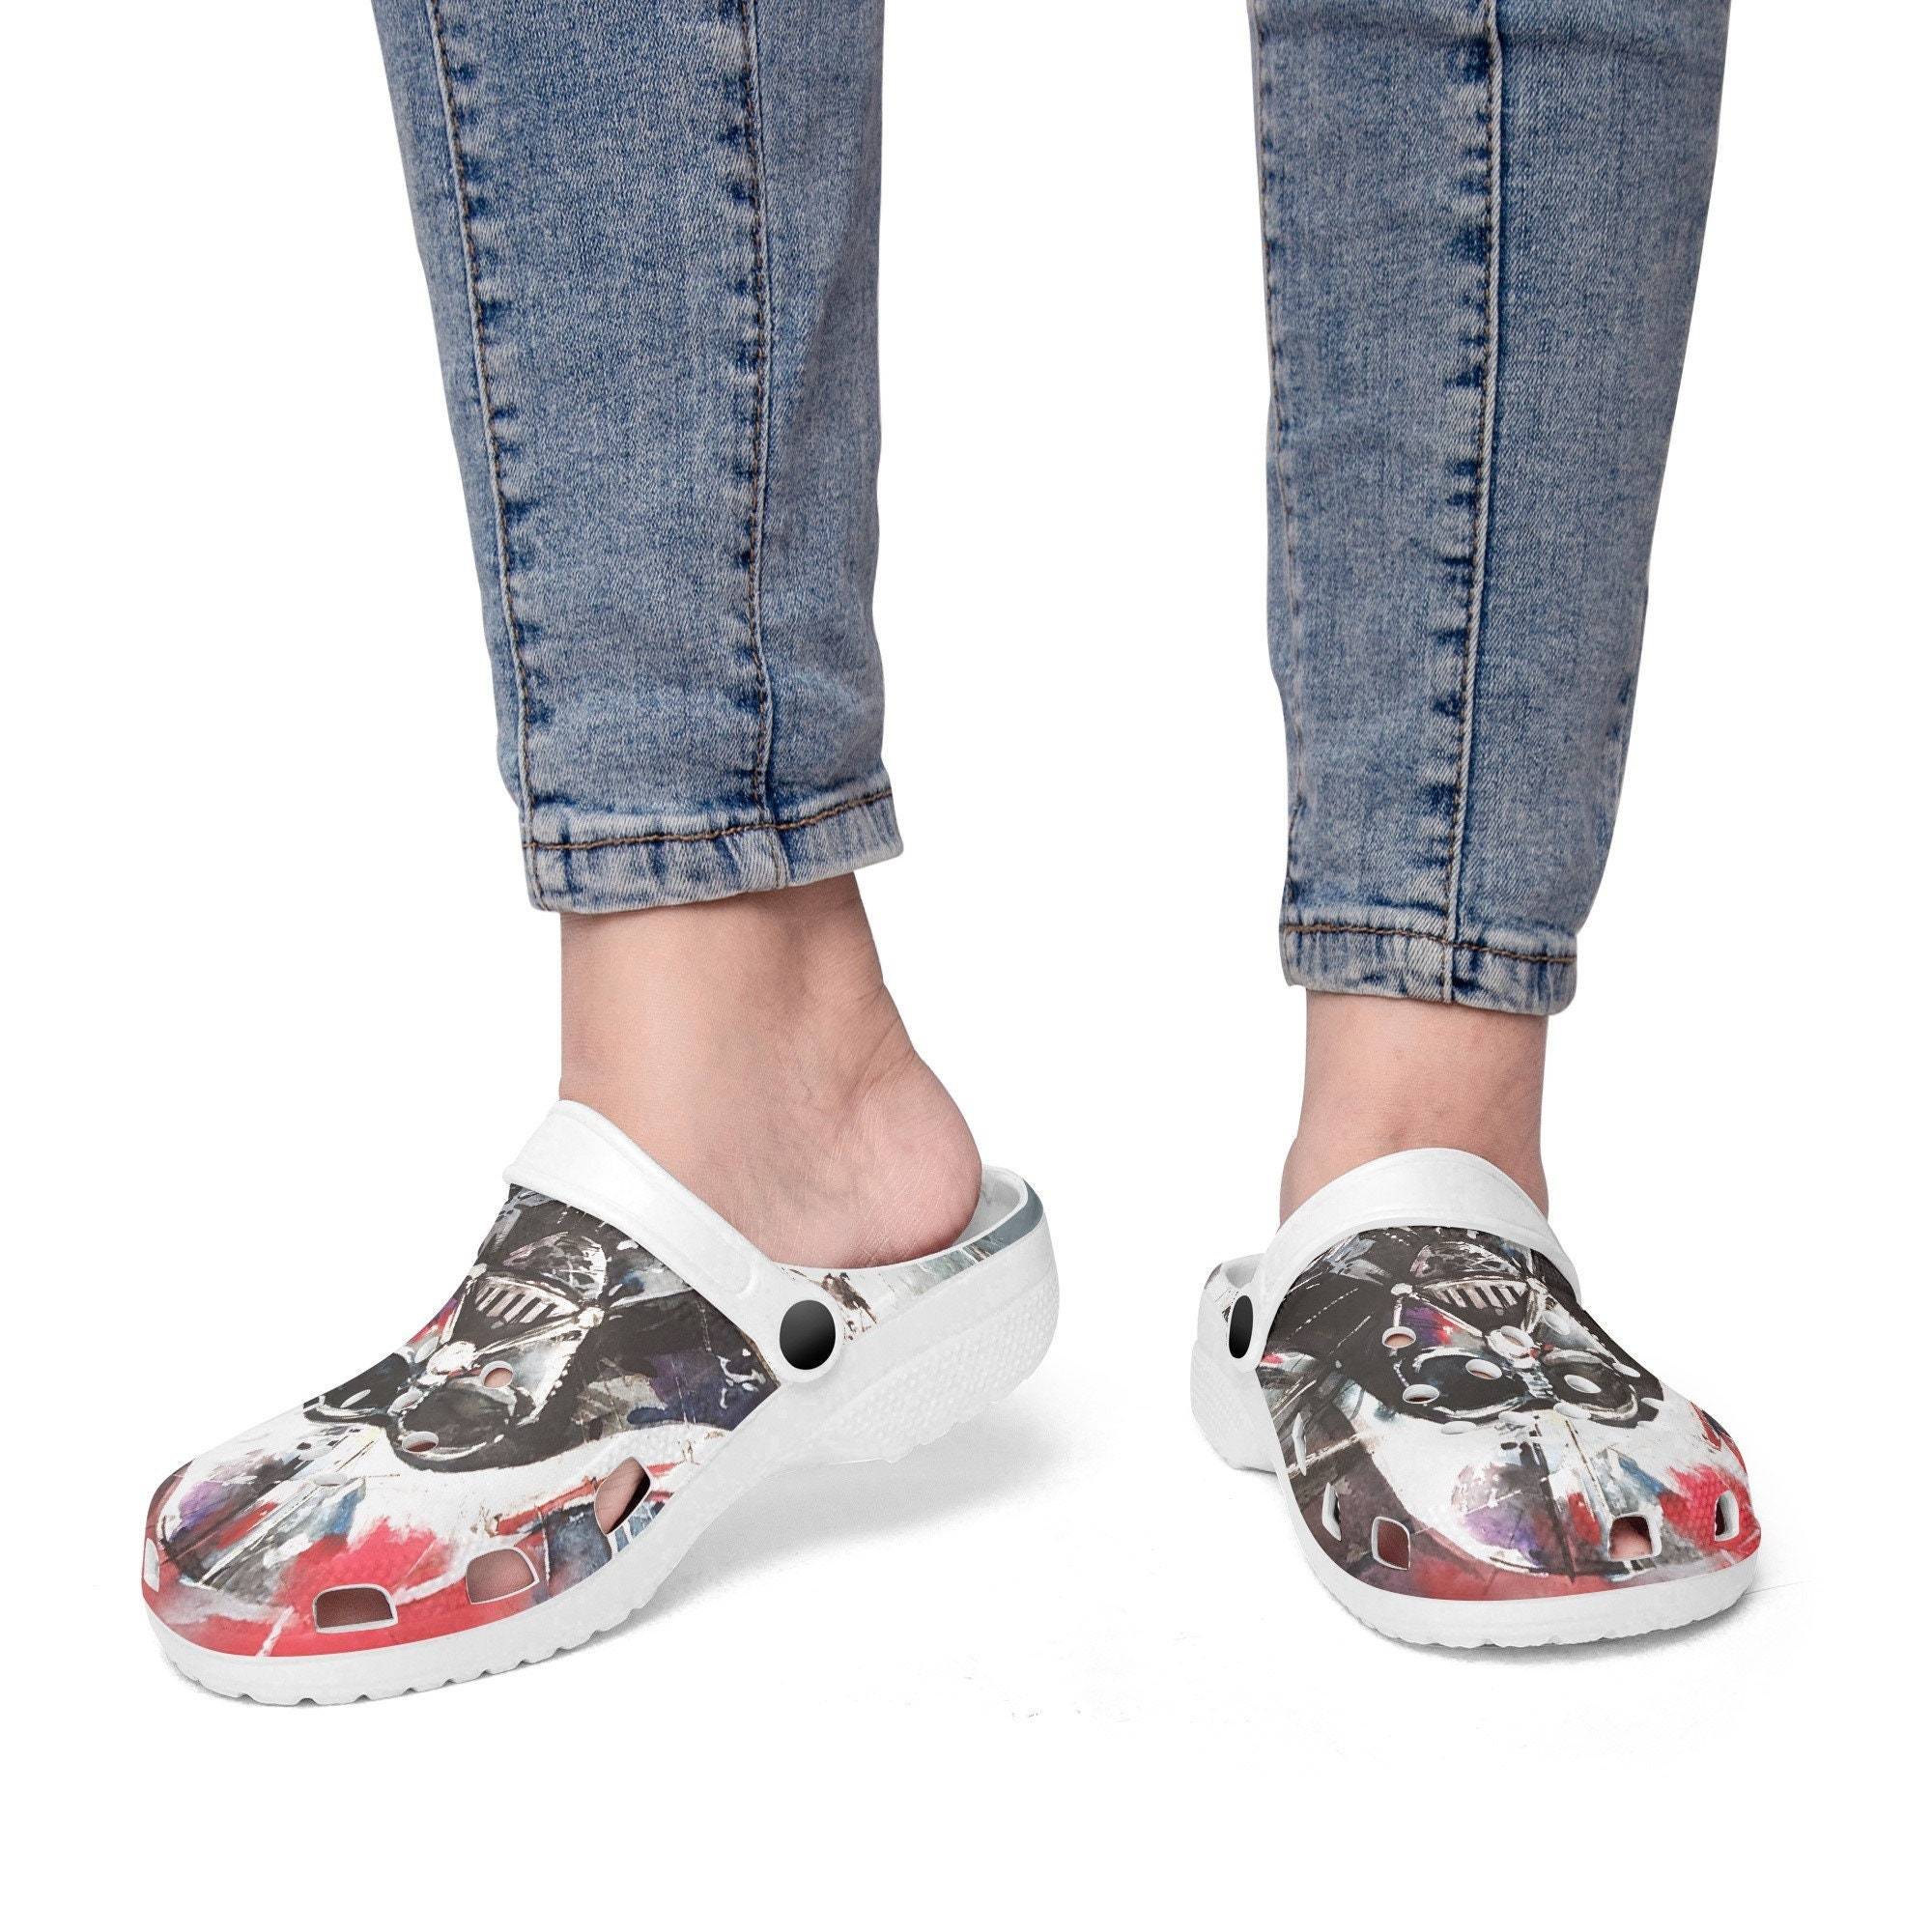 Star Wars Darth Vader Clogs, Looks Like Crocs Shoes, Women And Kids